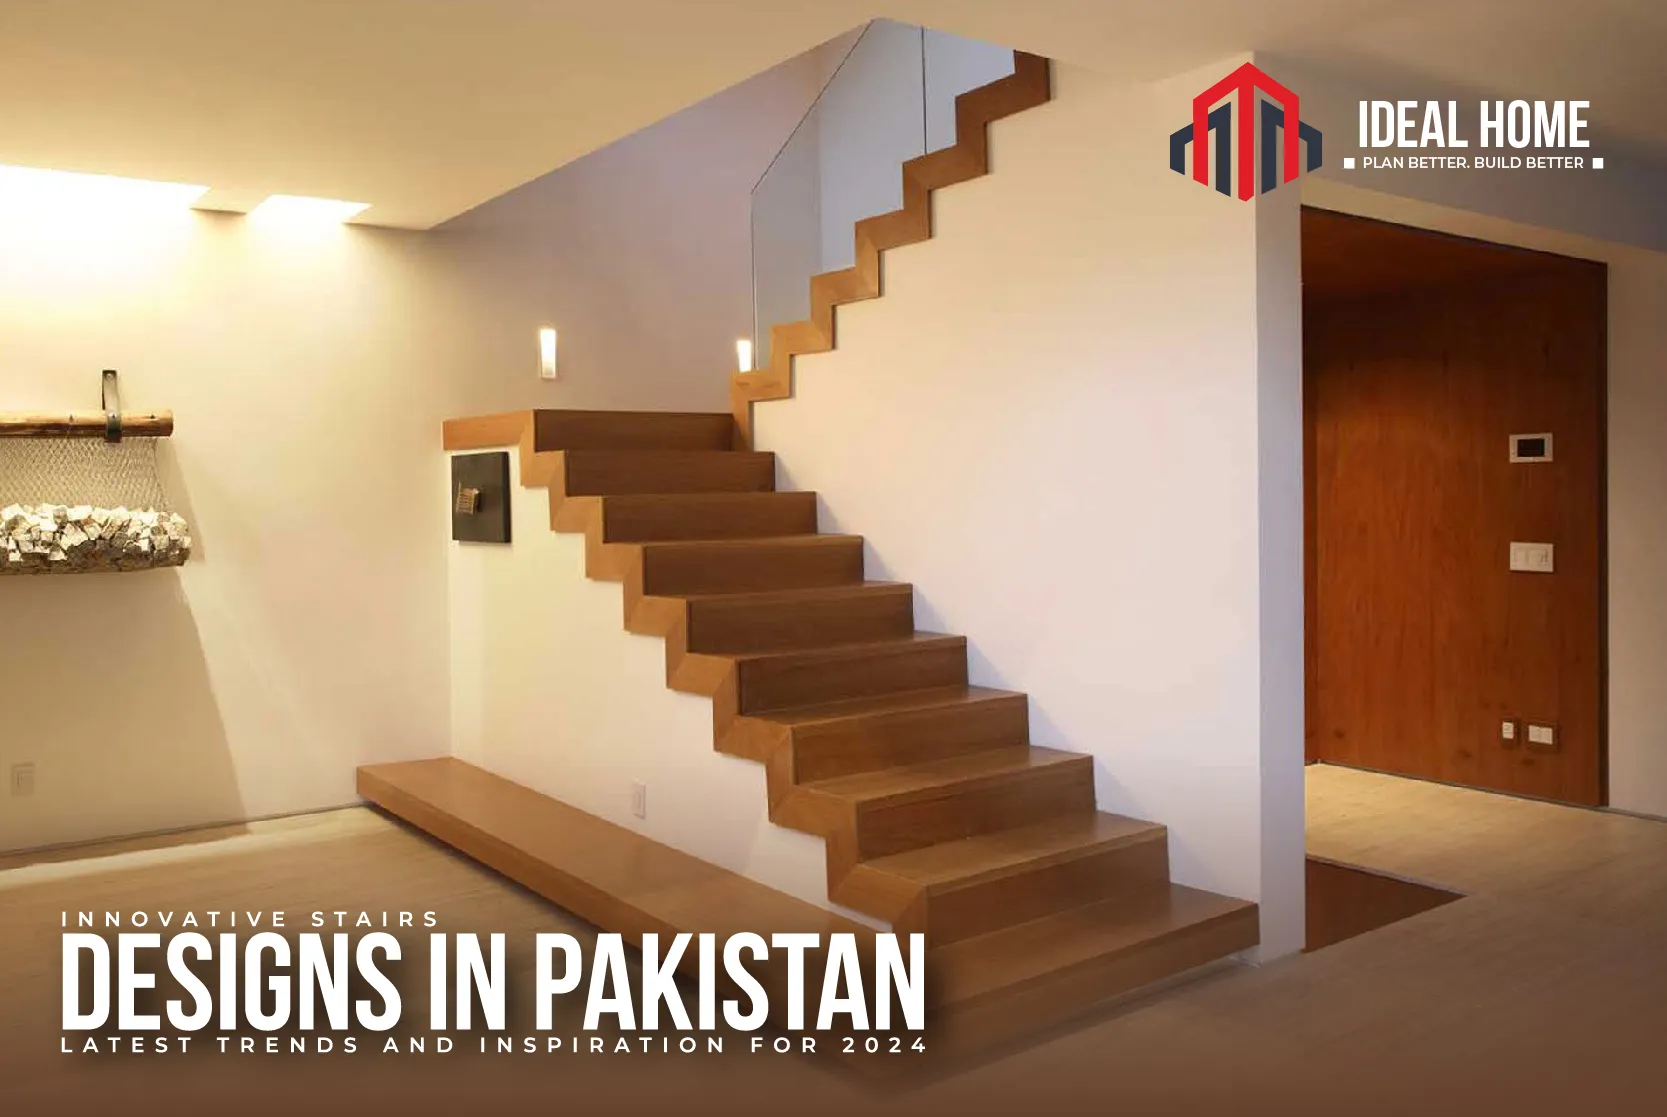 Innovative Stairs Designs in Pakistan: Latest Trends and Inspiration for 2024